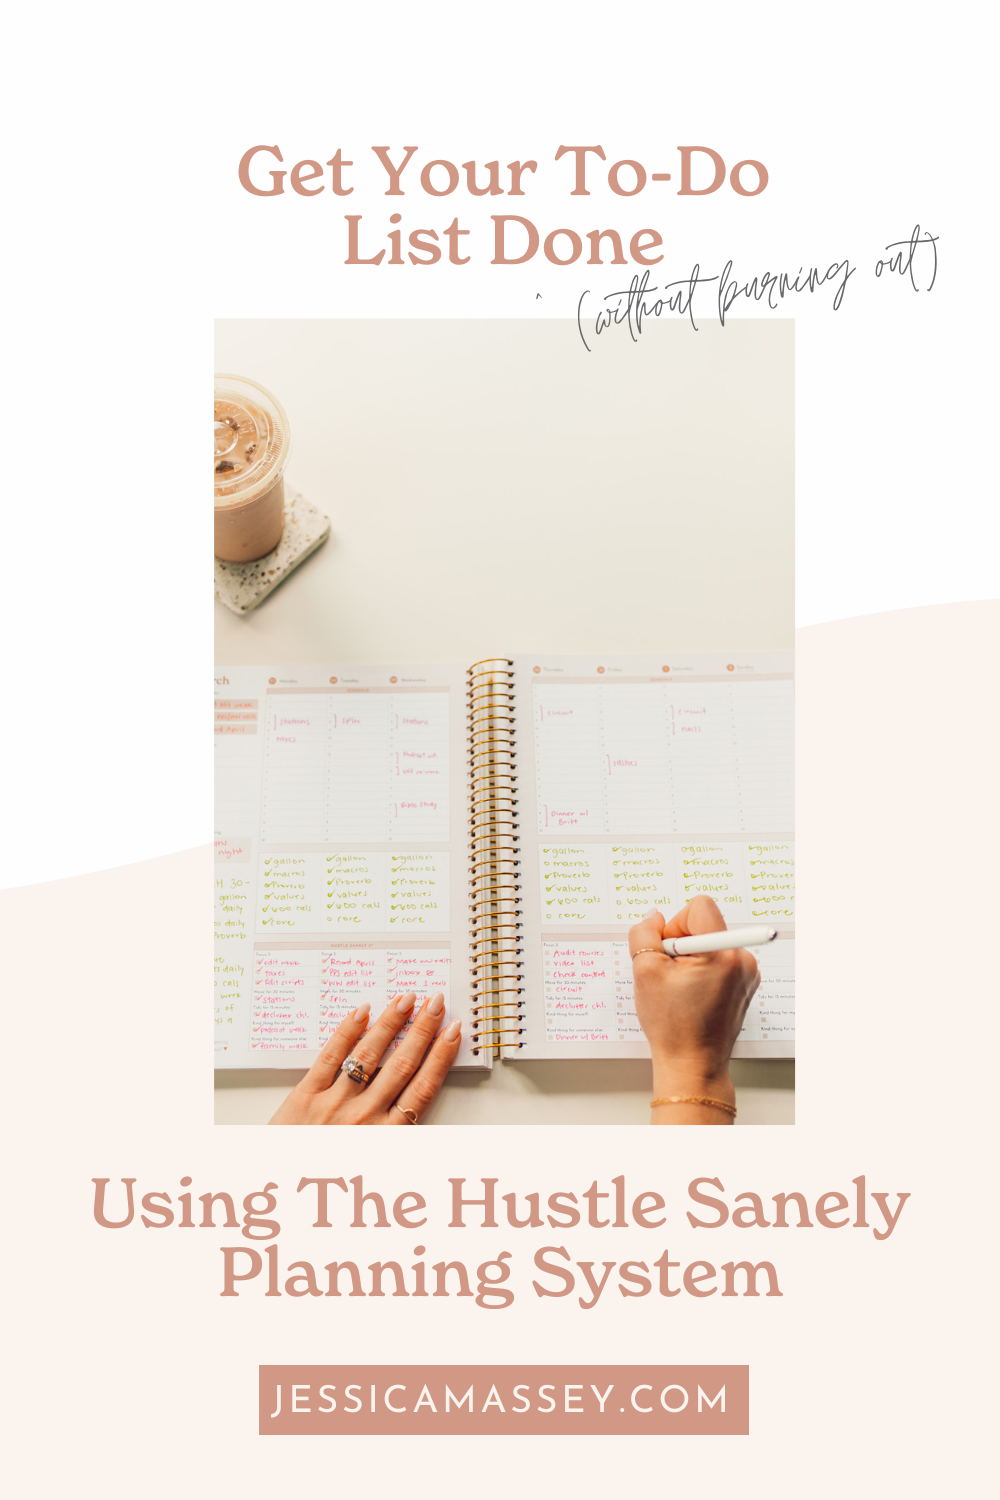 206: Our 2024 Yearly Family Vision Meeting — Hustle Sanely® by Jess Massey